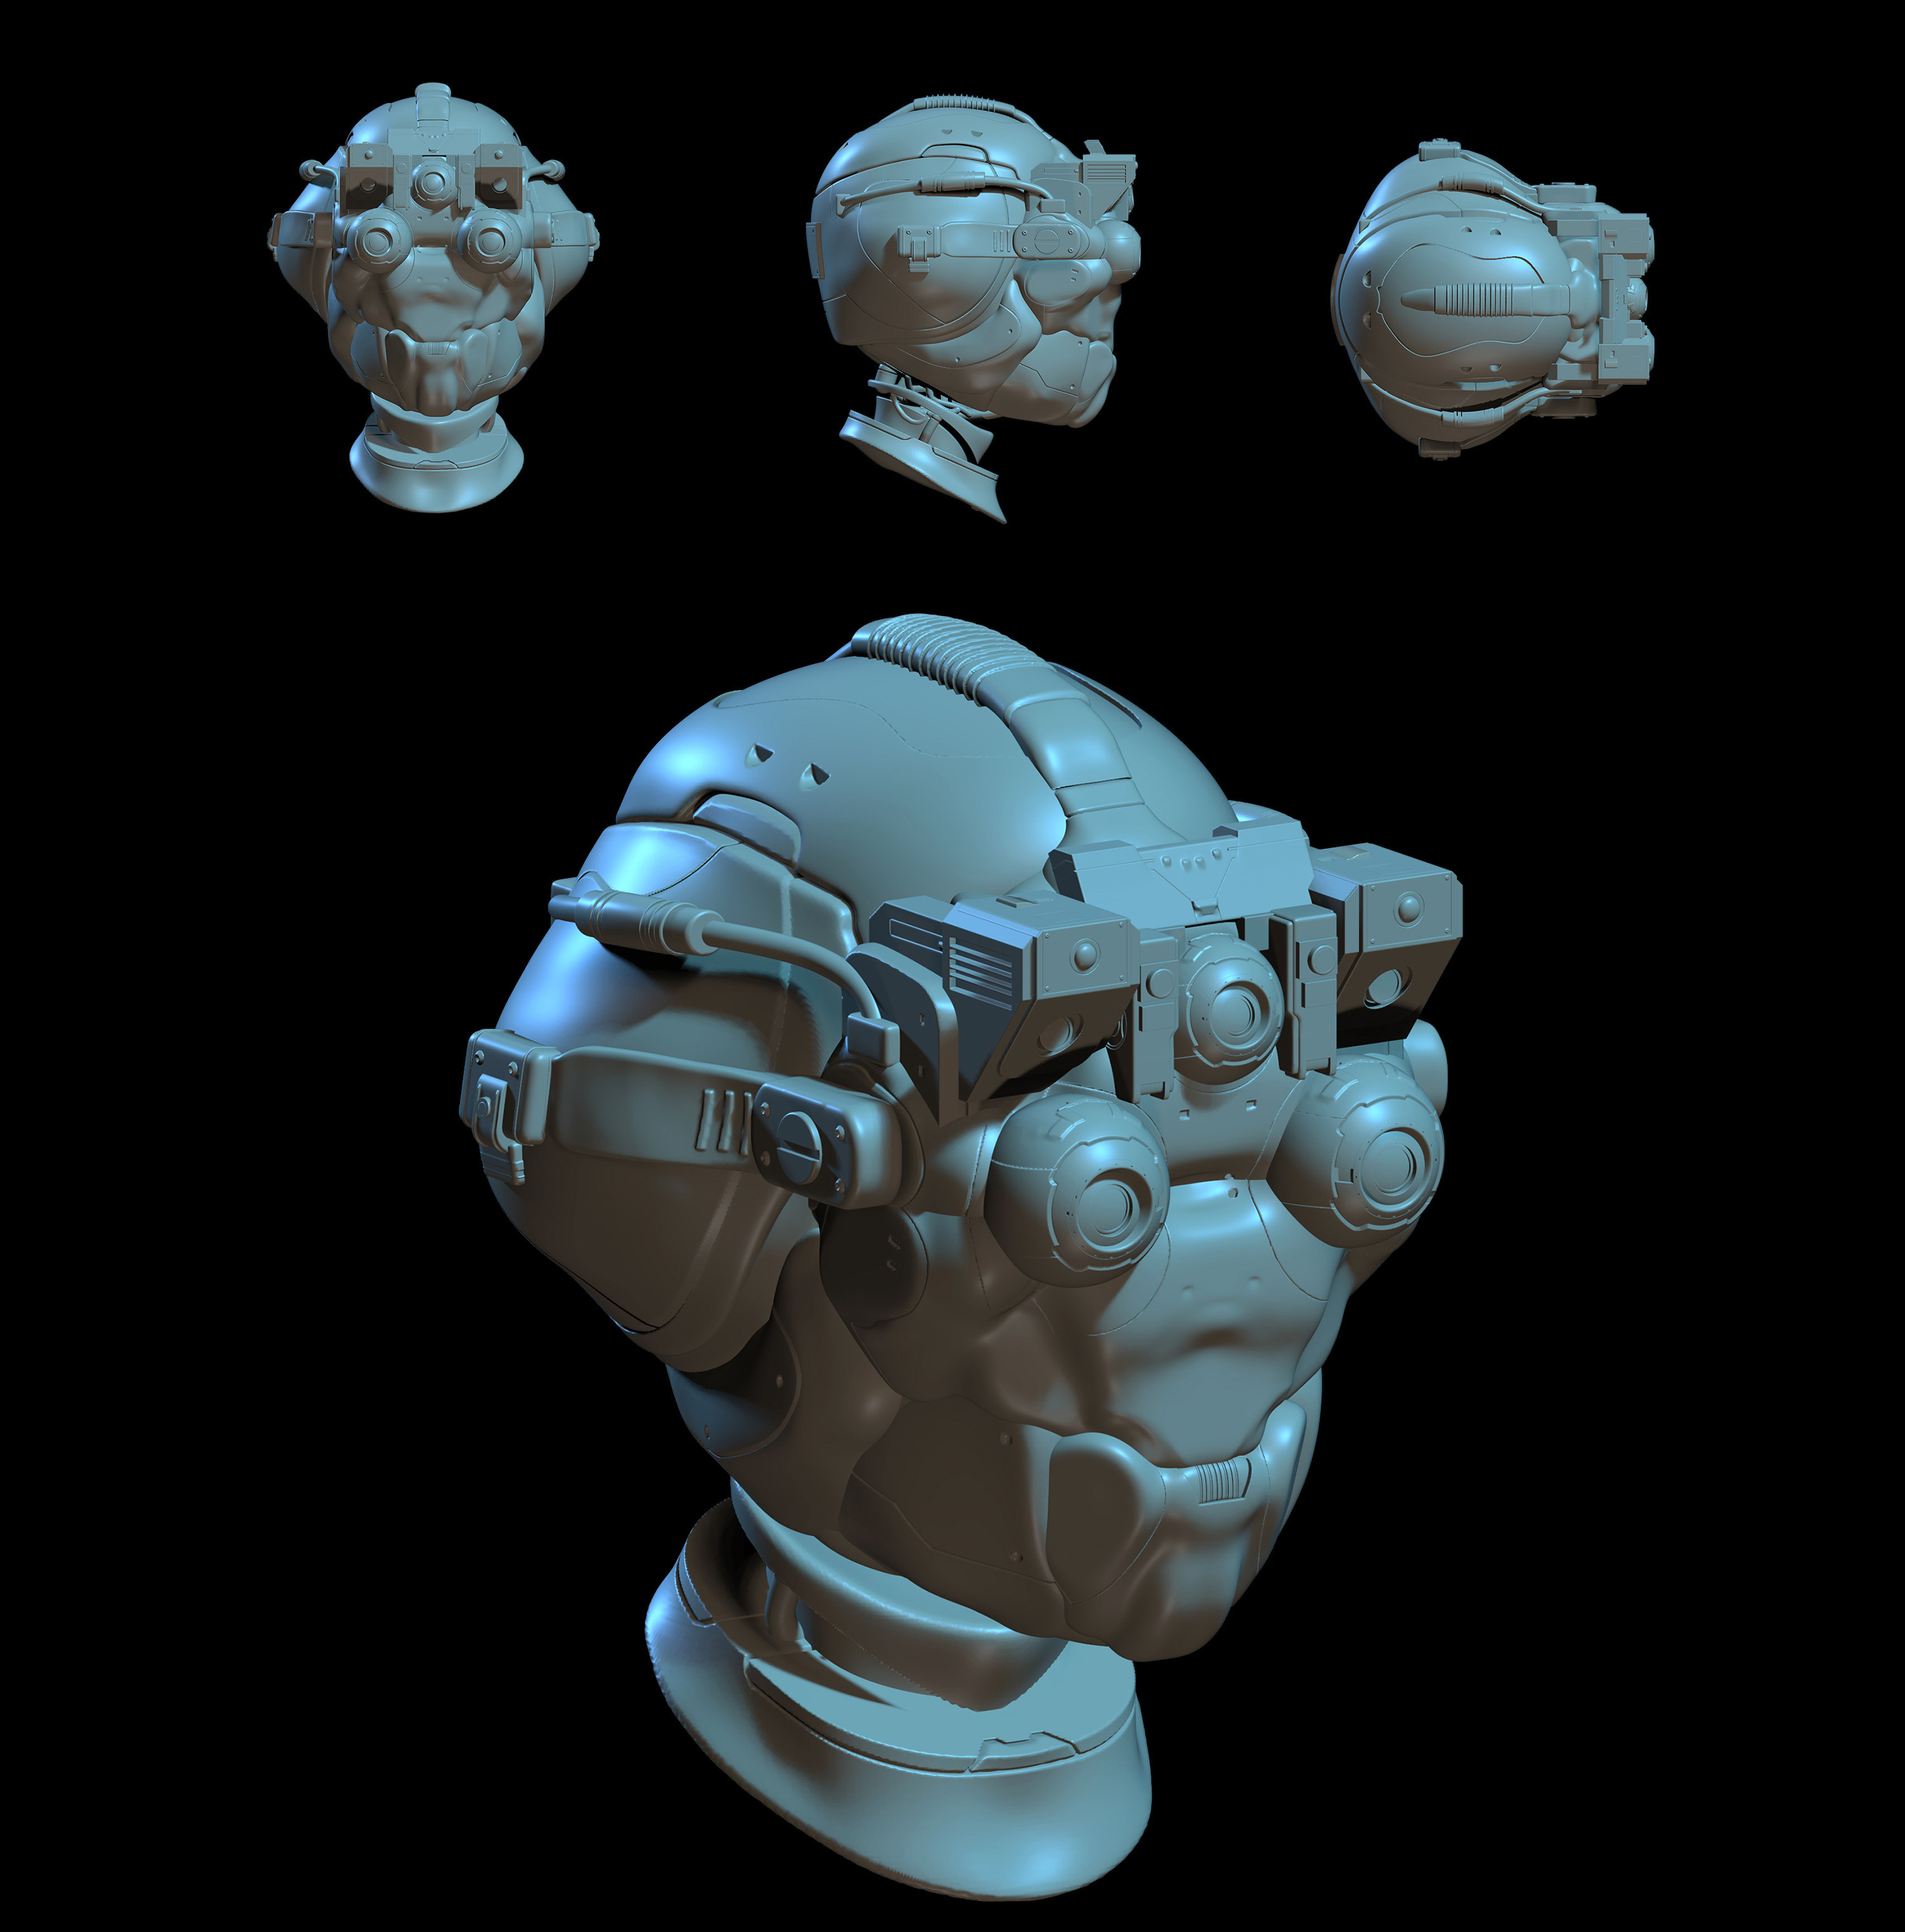 Bot head design in 3D Coat - this pushed me in a more "retro" direction in the final image